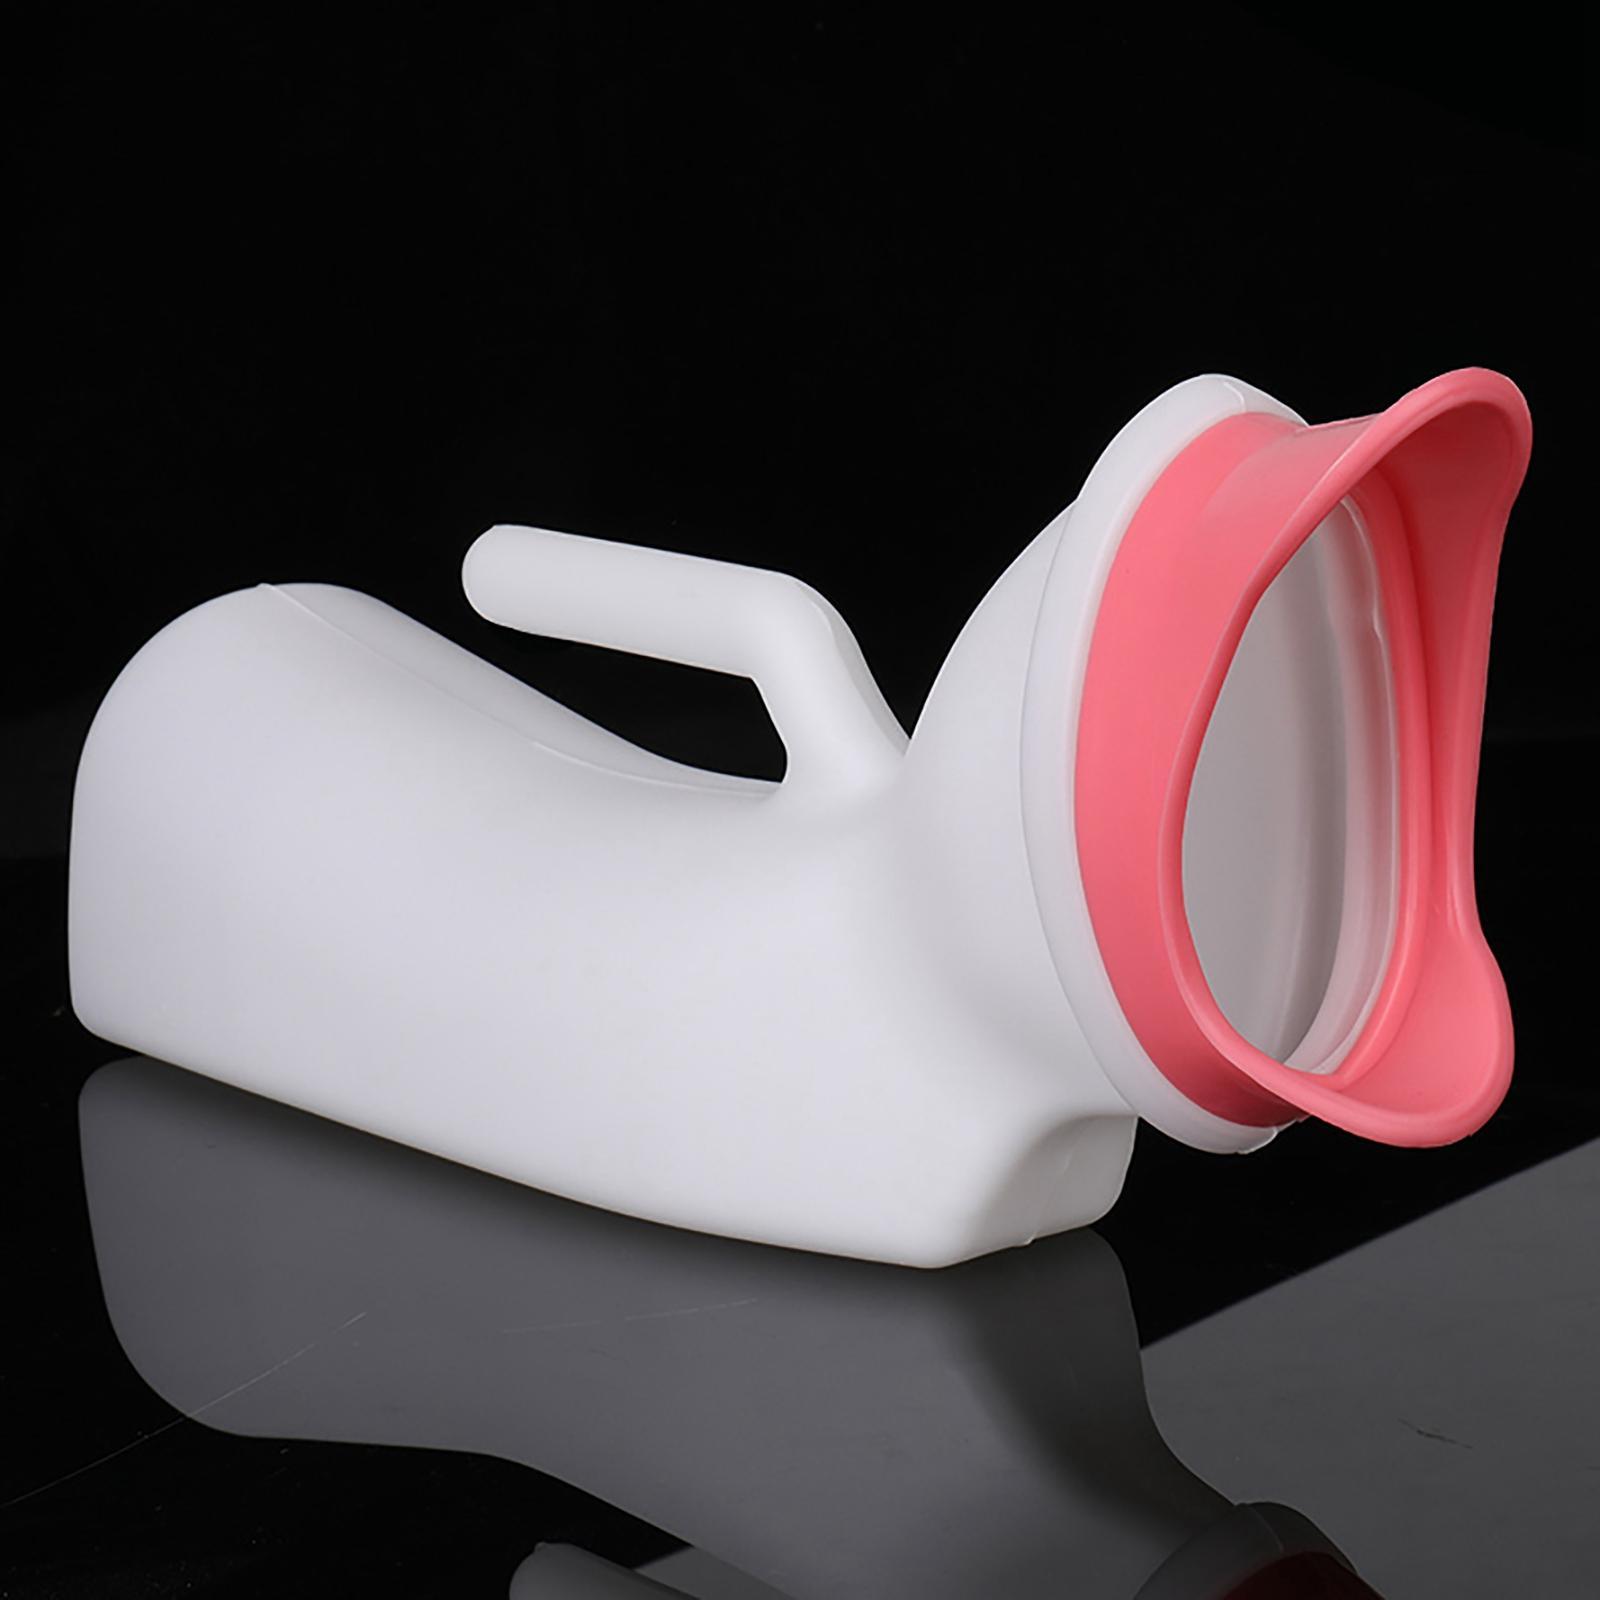 Female Potty Urinal 1000ml Urine Collection Can Bedpans for Travel